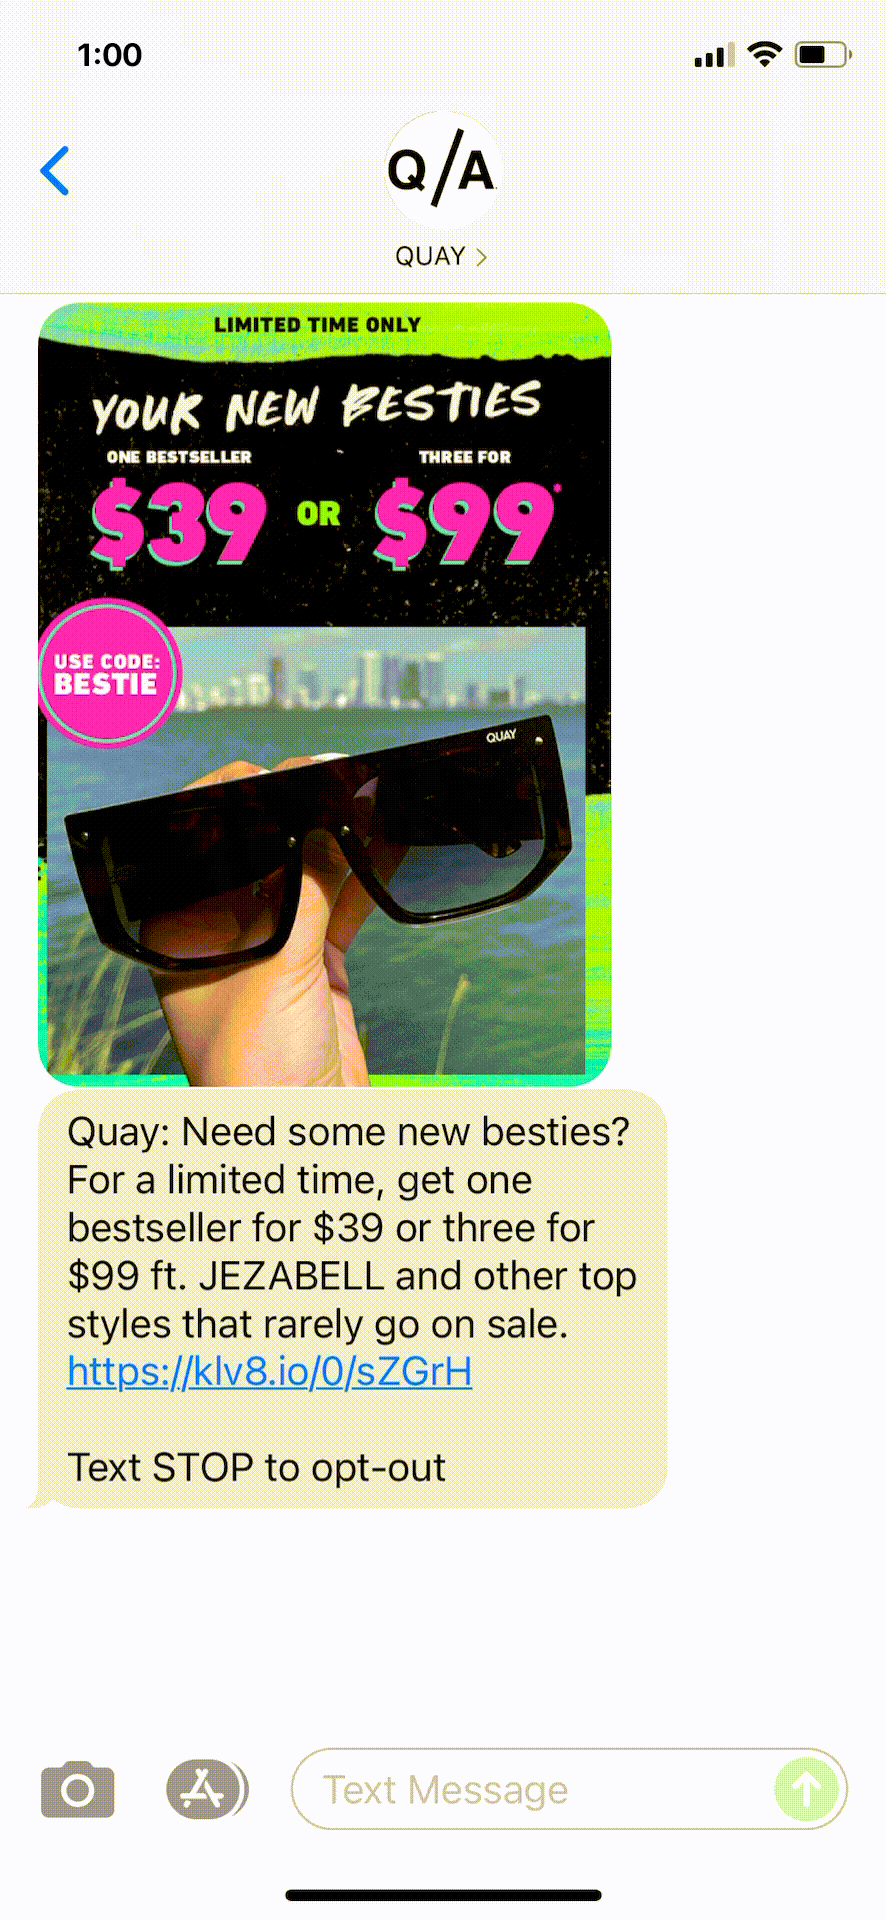 Quay-Text-Message-Marketing-Example-08.13.2021